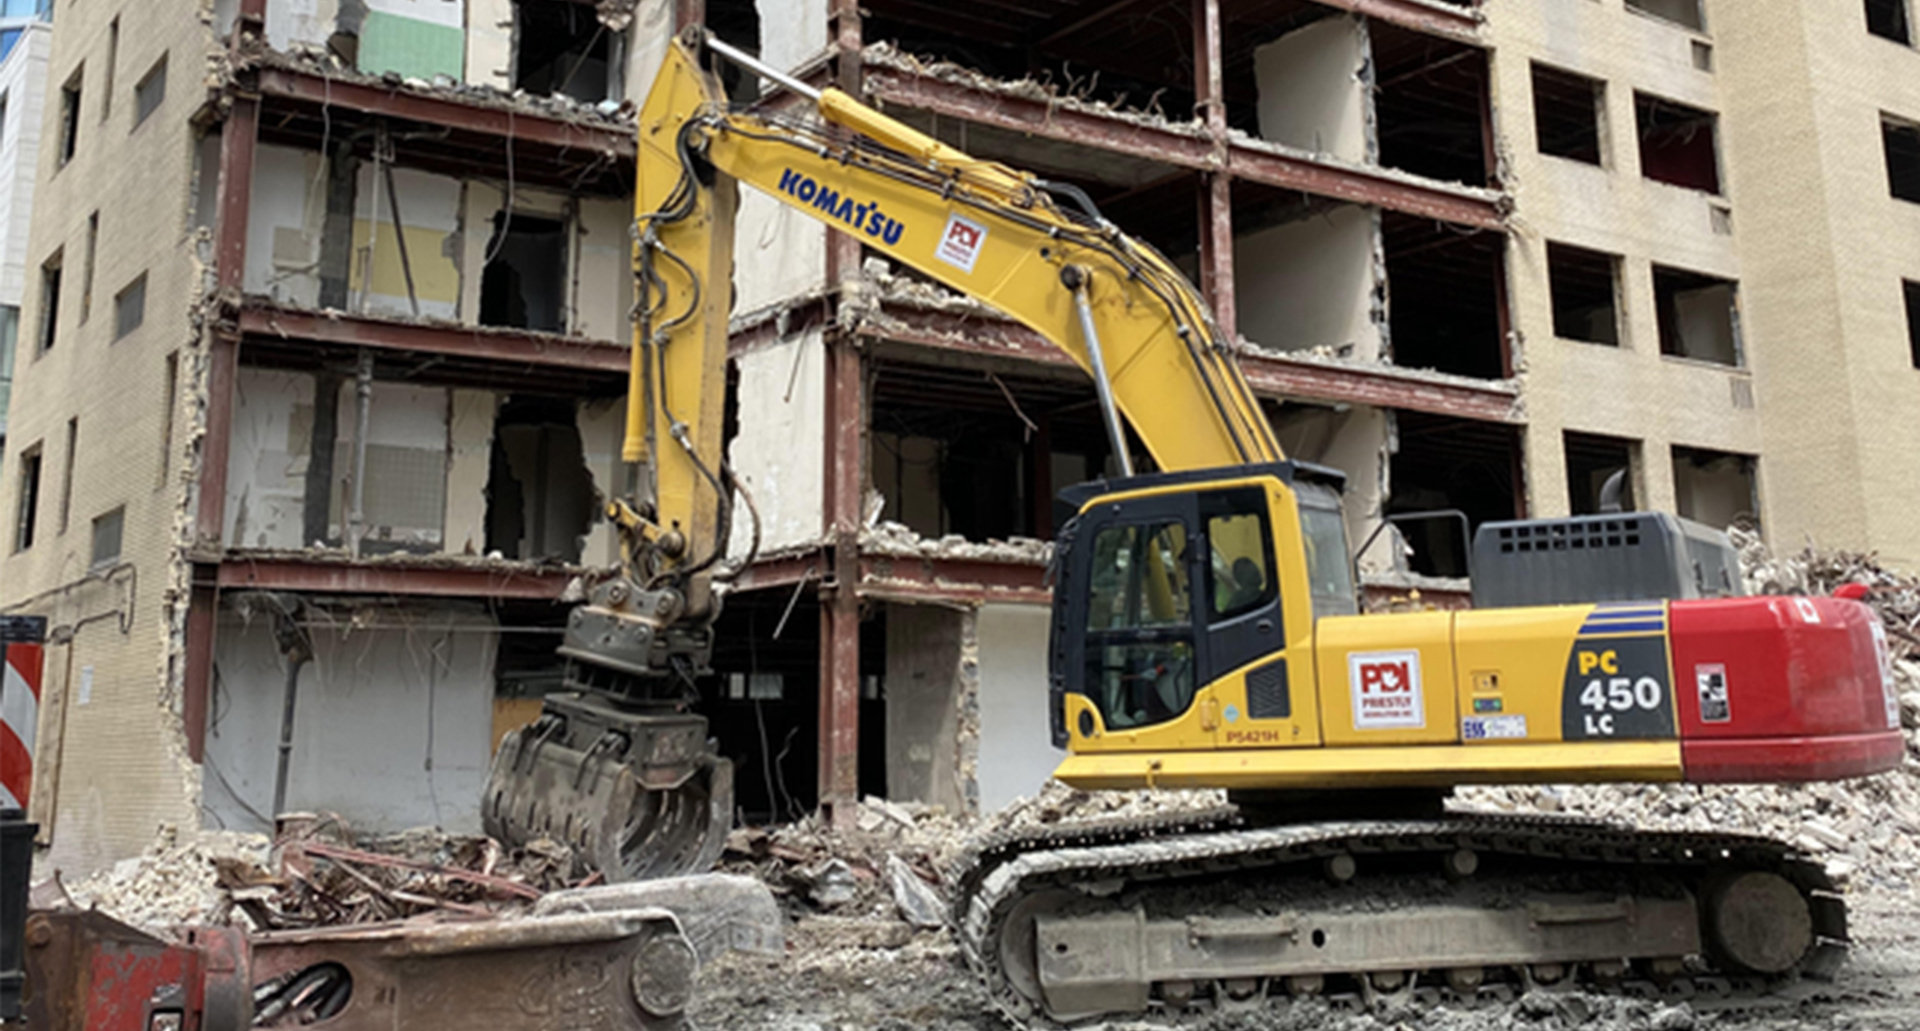 The Beginners Guide to Demolition Projects